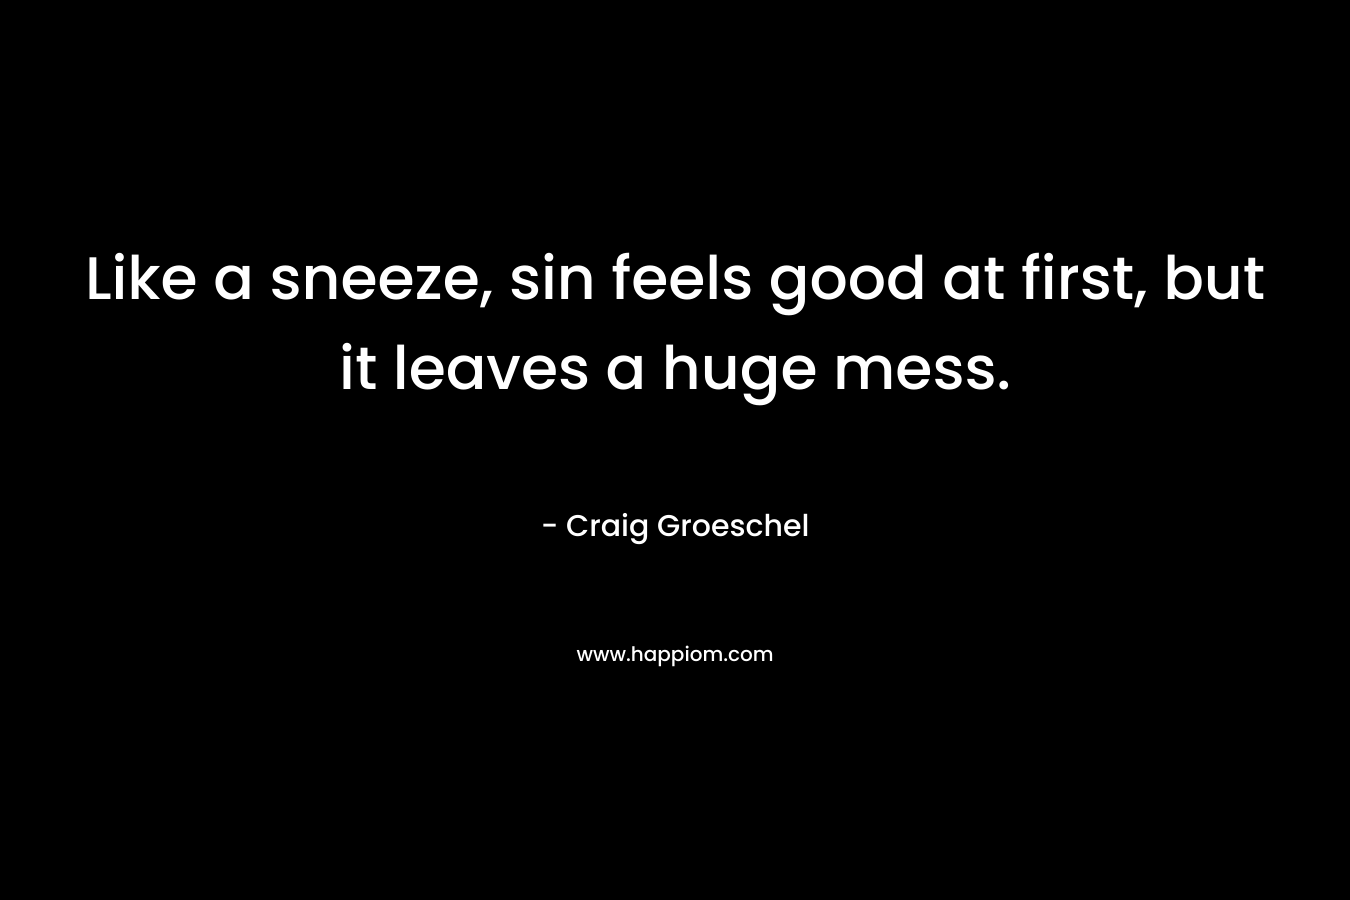 Like a sneeze, sin feels good at first, but it leaves a huge mess. – Craig Groeschel